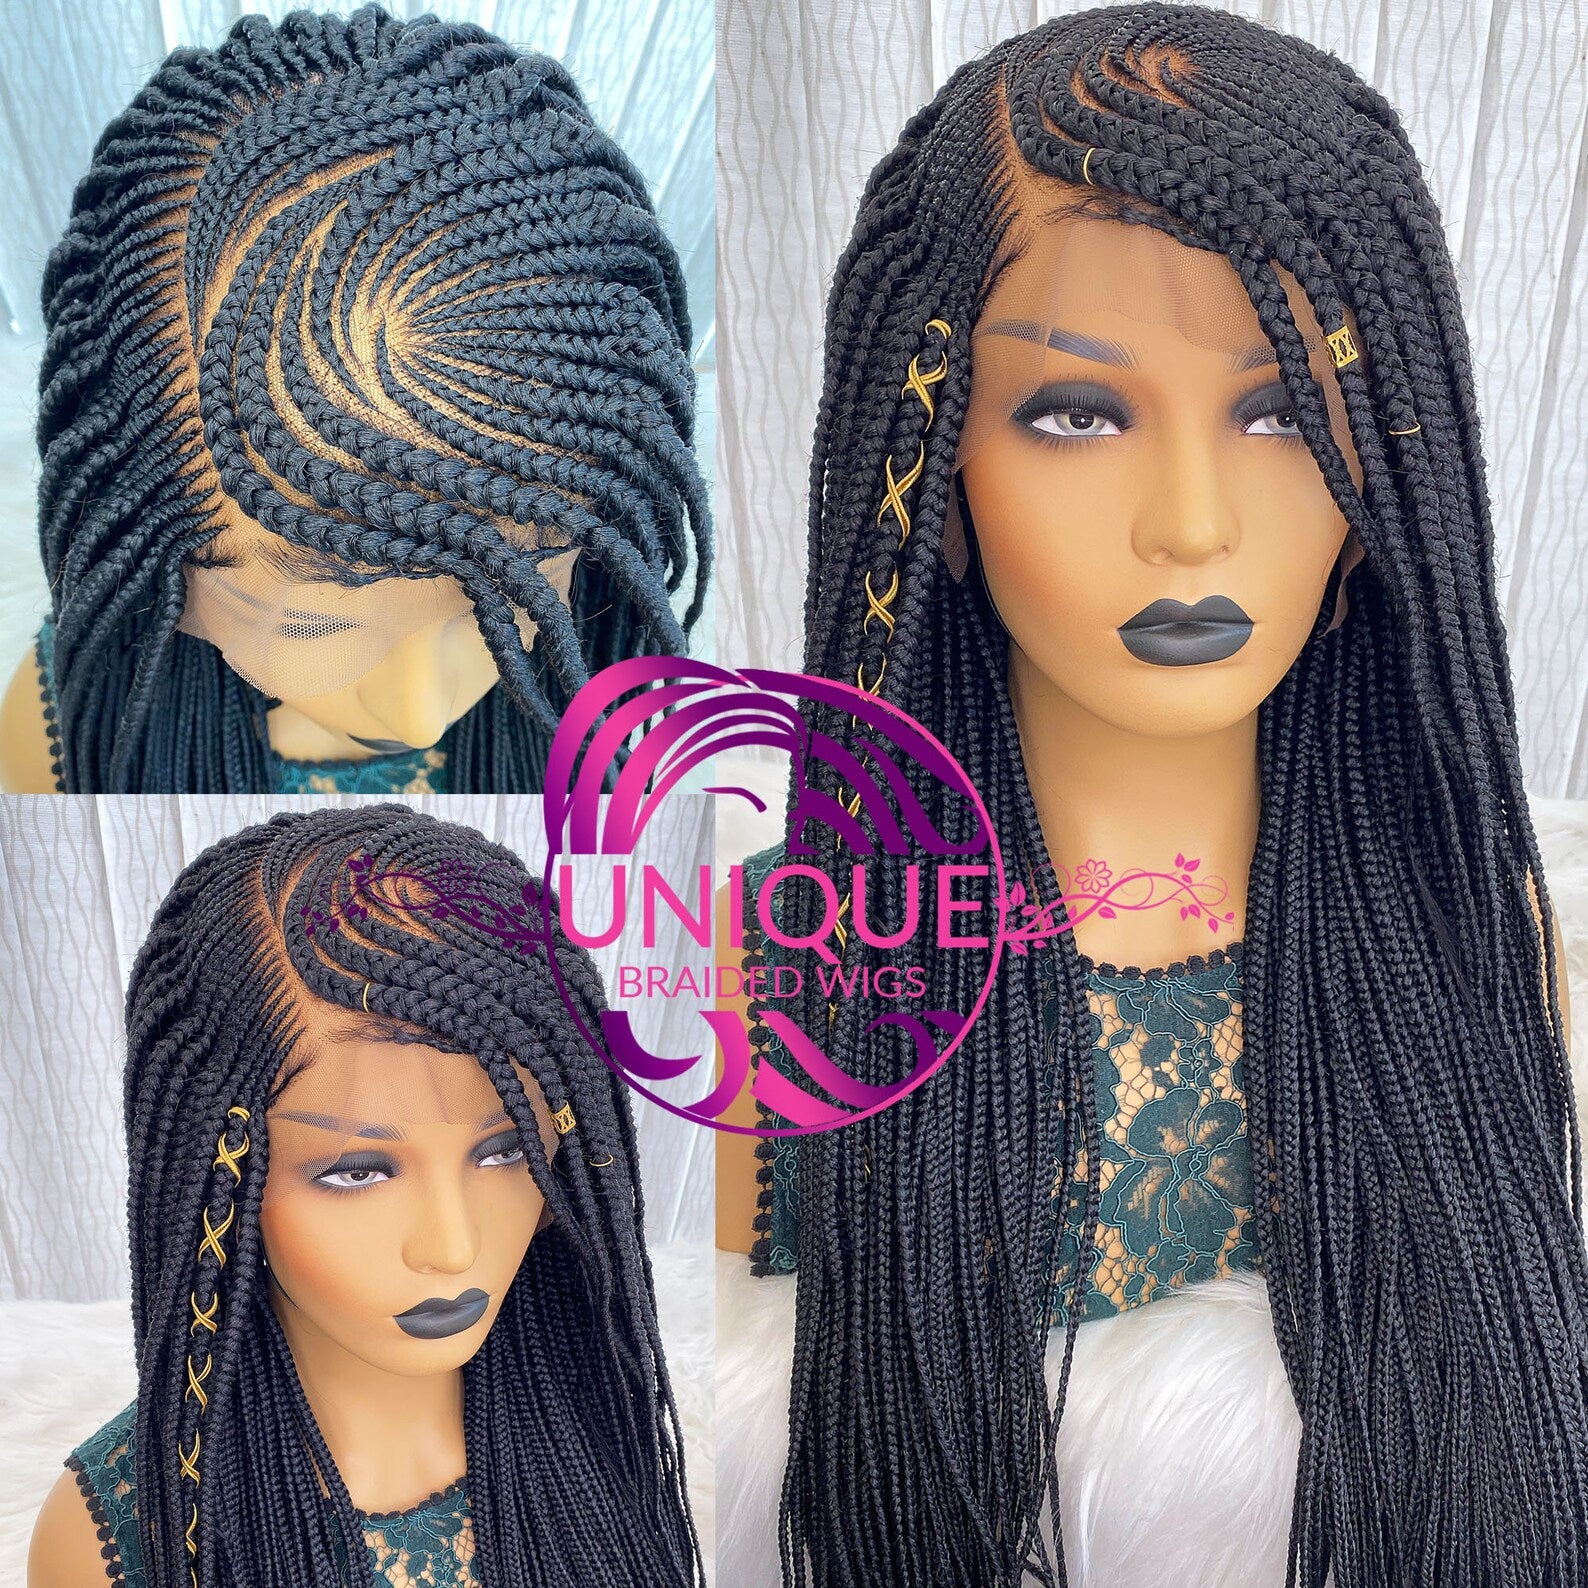 Shop Lace Front Cornrow Braided Wig on